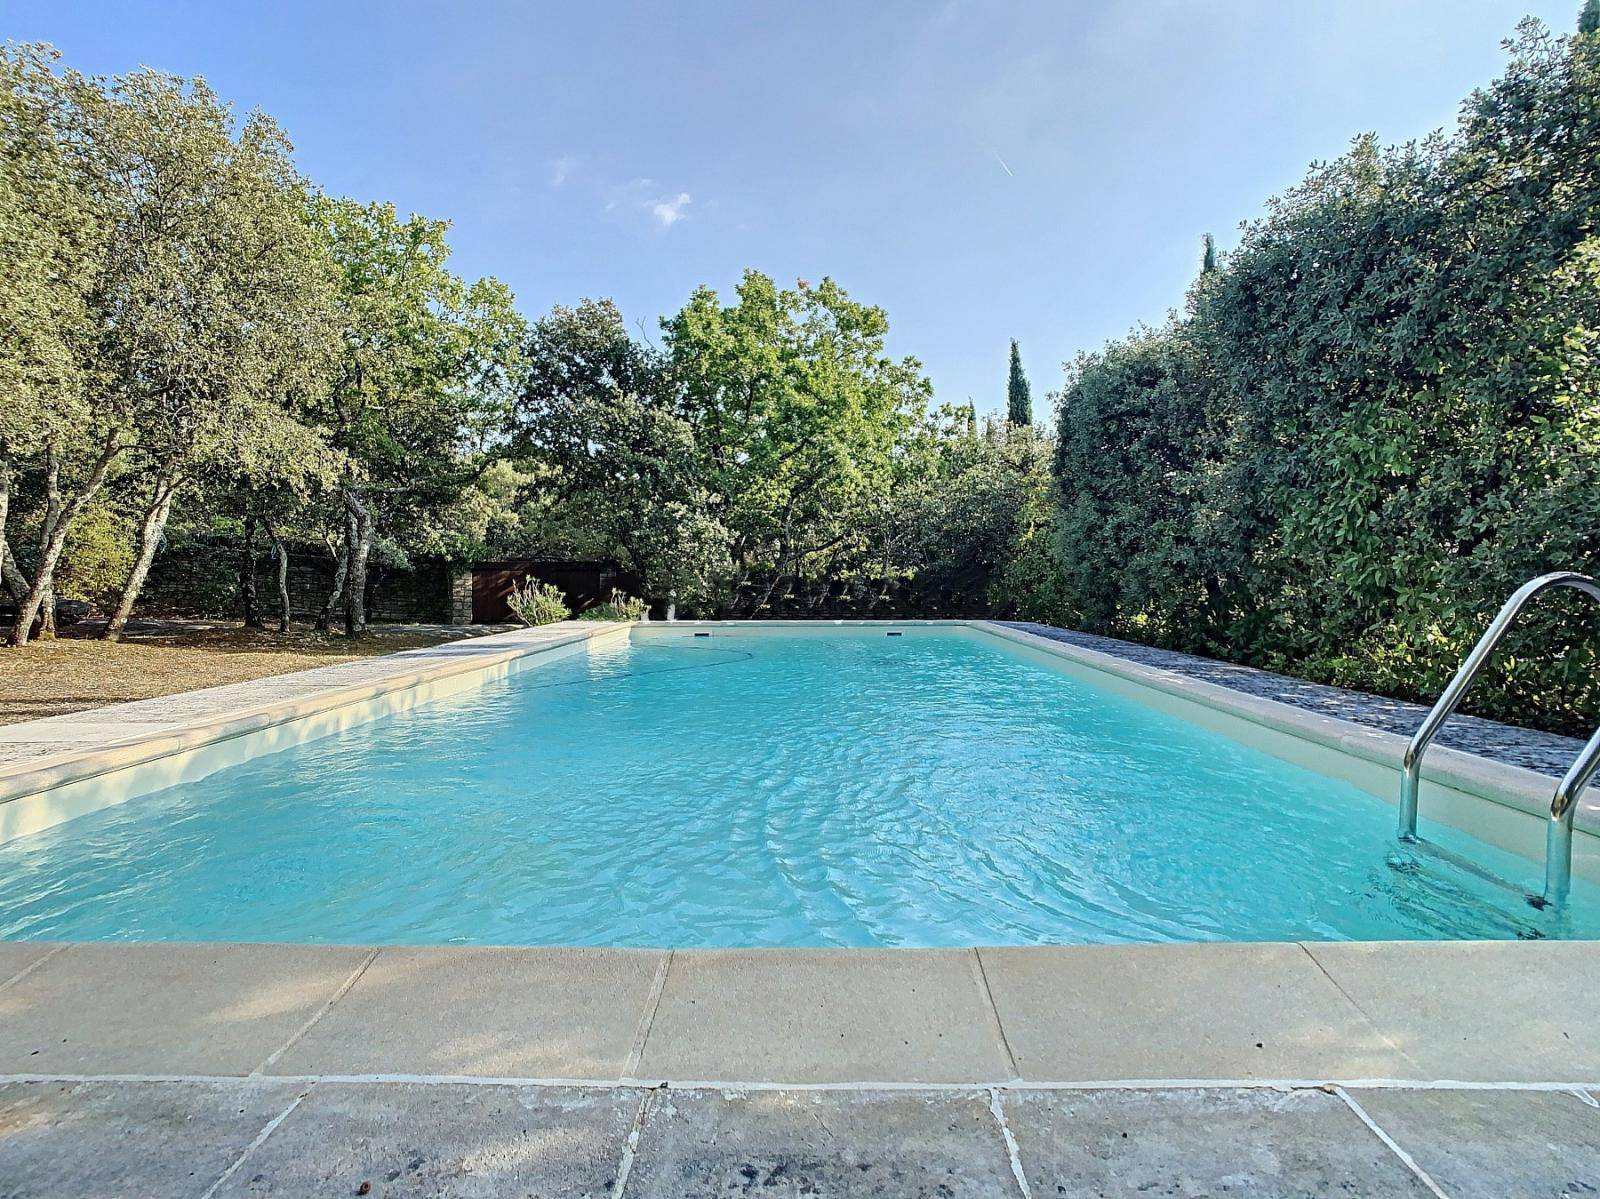 STONE HOUSE WITH SWIMMING POOL CLOSE TO THE VILLAGE OF GORDES